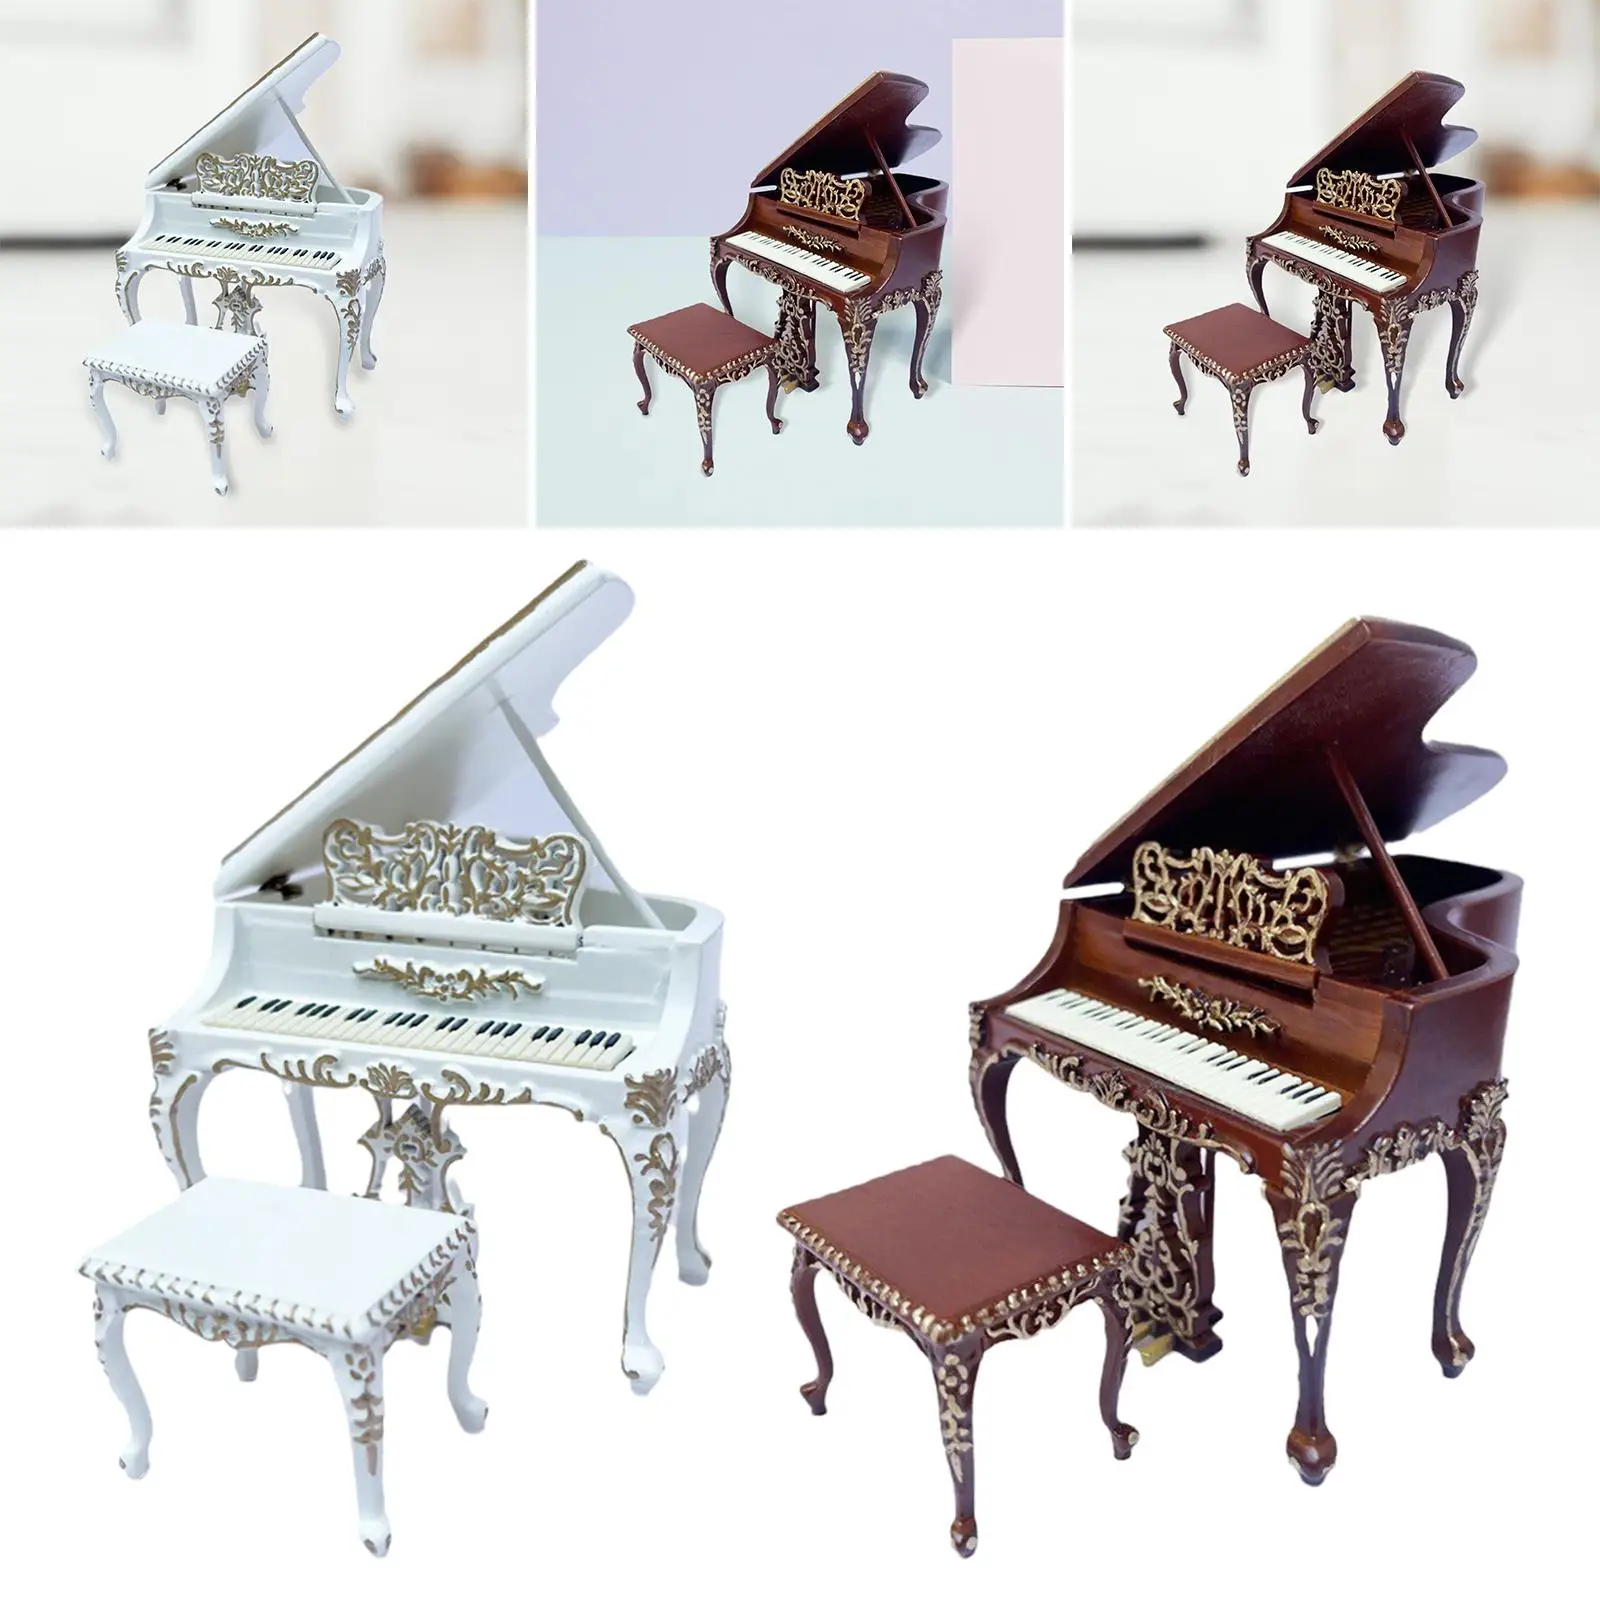 Miniature Piano Model with Stool Dollhouse Decor Mini House Scene Furniture Miniature Piano with Chair for Living Room Decor